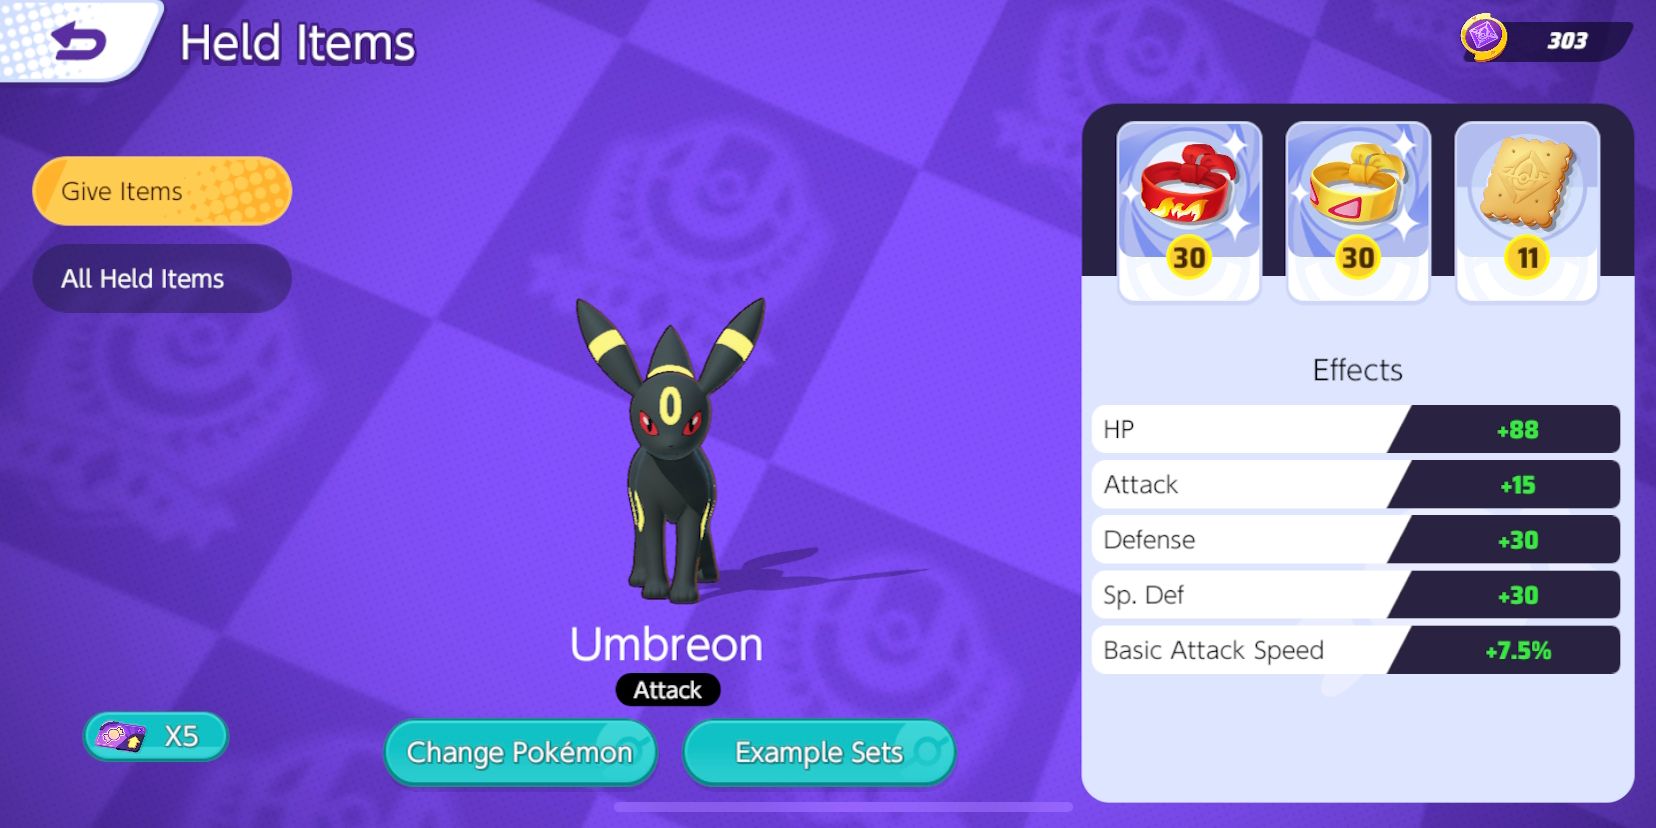 Umbreon Held Item selection screen, with the Muscle Band, Focus Band, and Aeos Cookie chosen